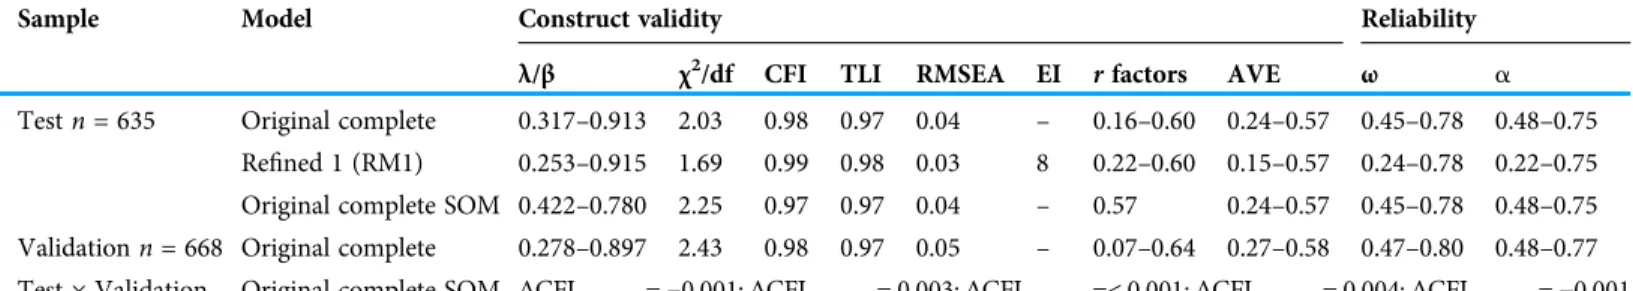 Table 3 Measures of construct validity, reliability and factorial invariance of Individual Lifestyle Proﬁle (PEVI) applied among university students.